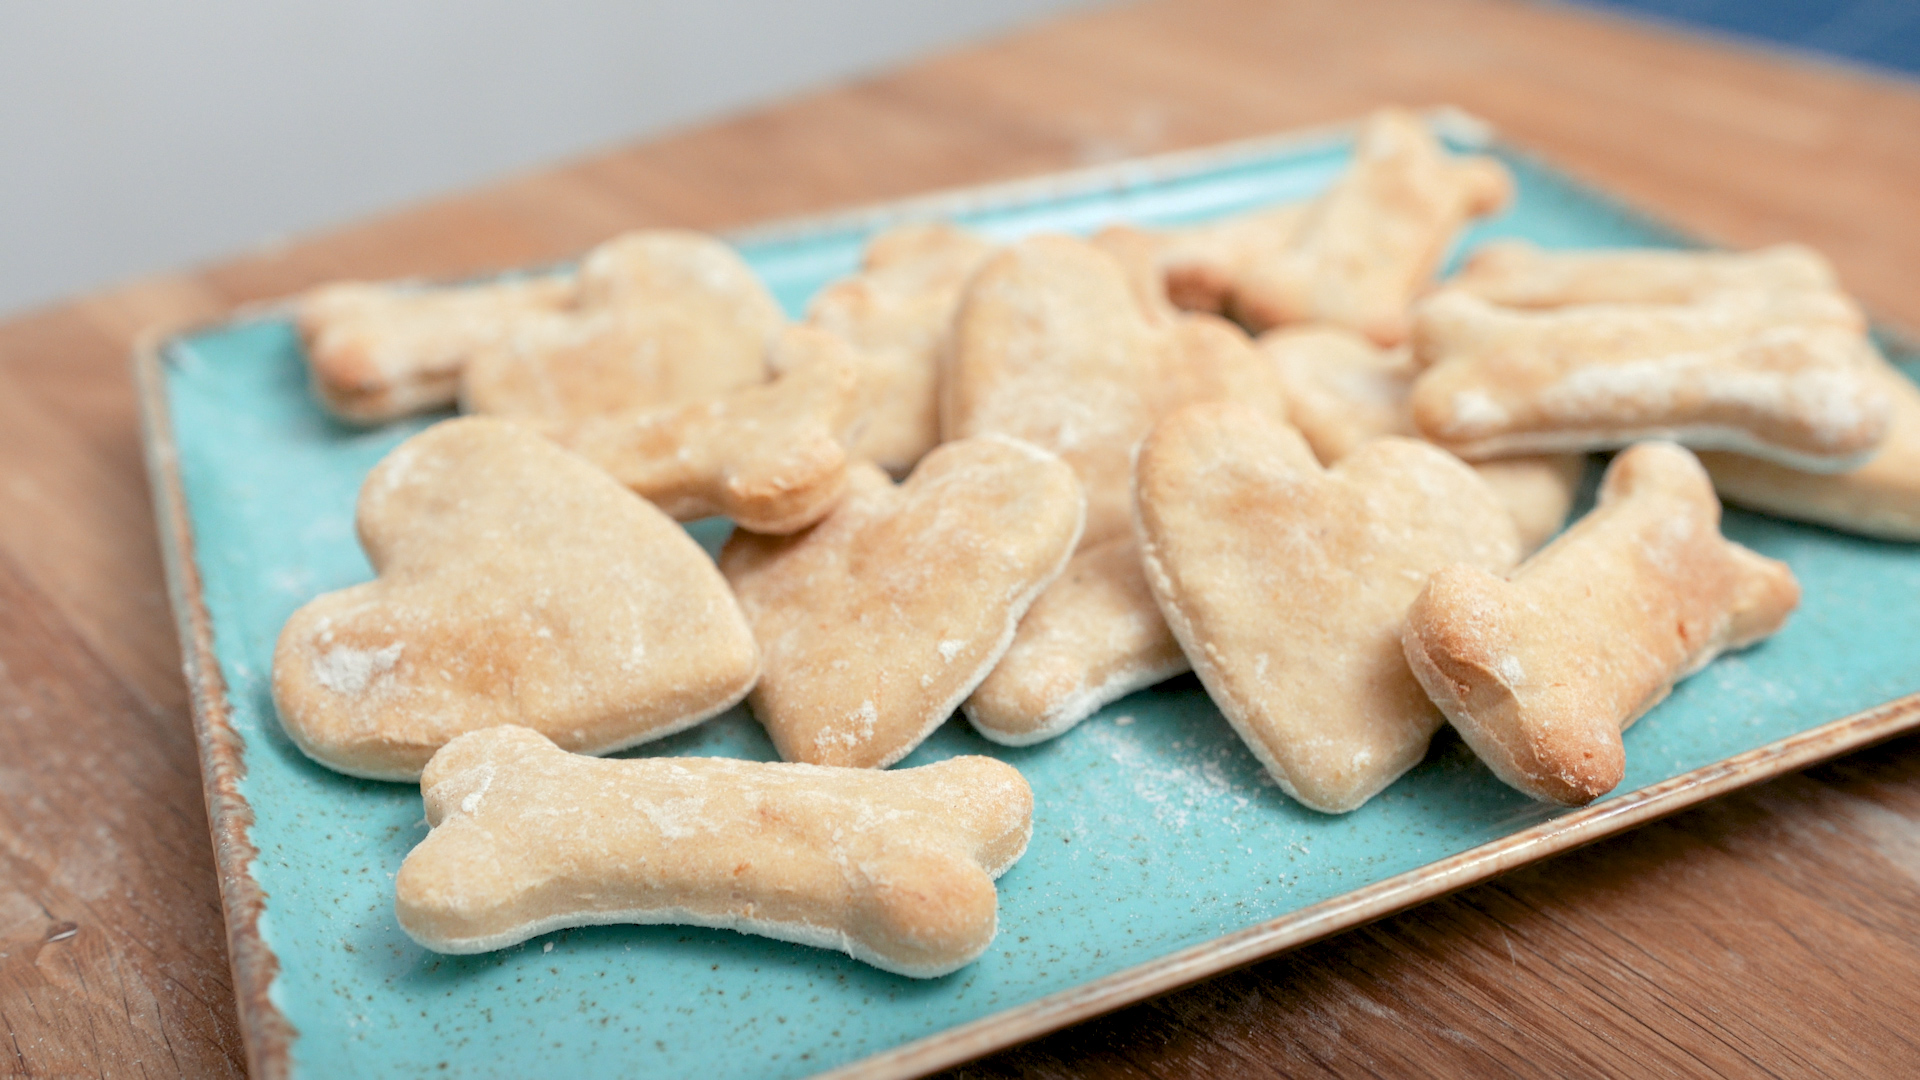 Bone and heart shaped dog biscuits on a light blue plate